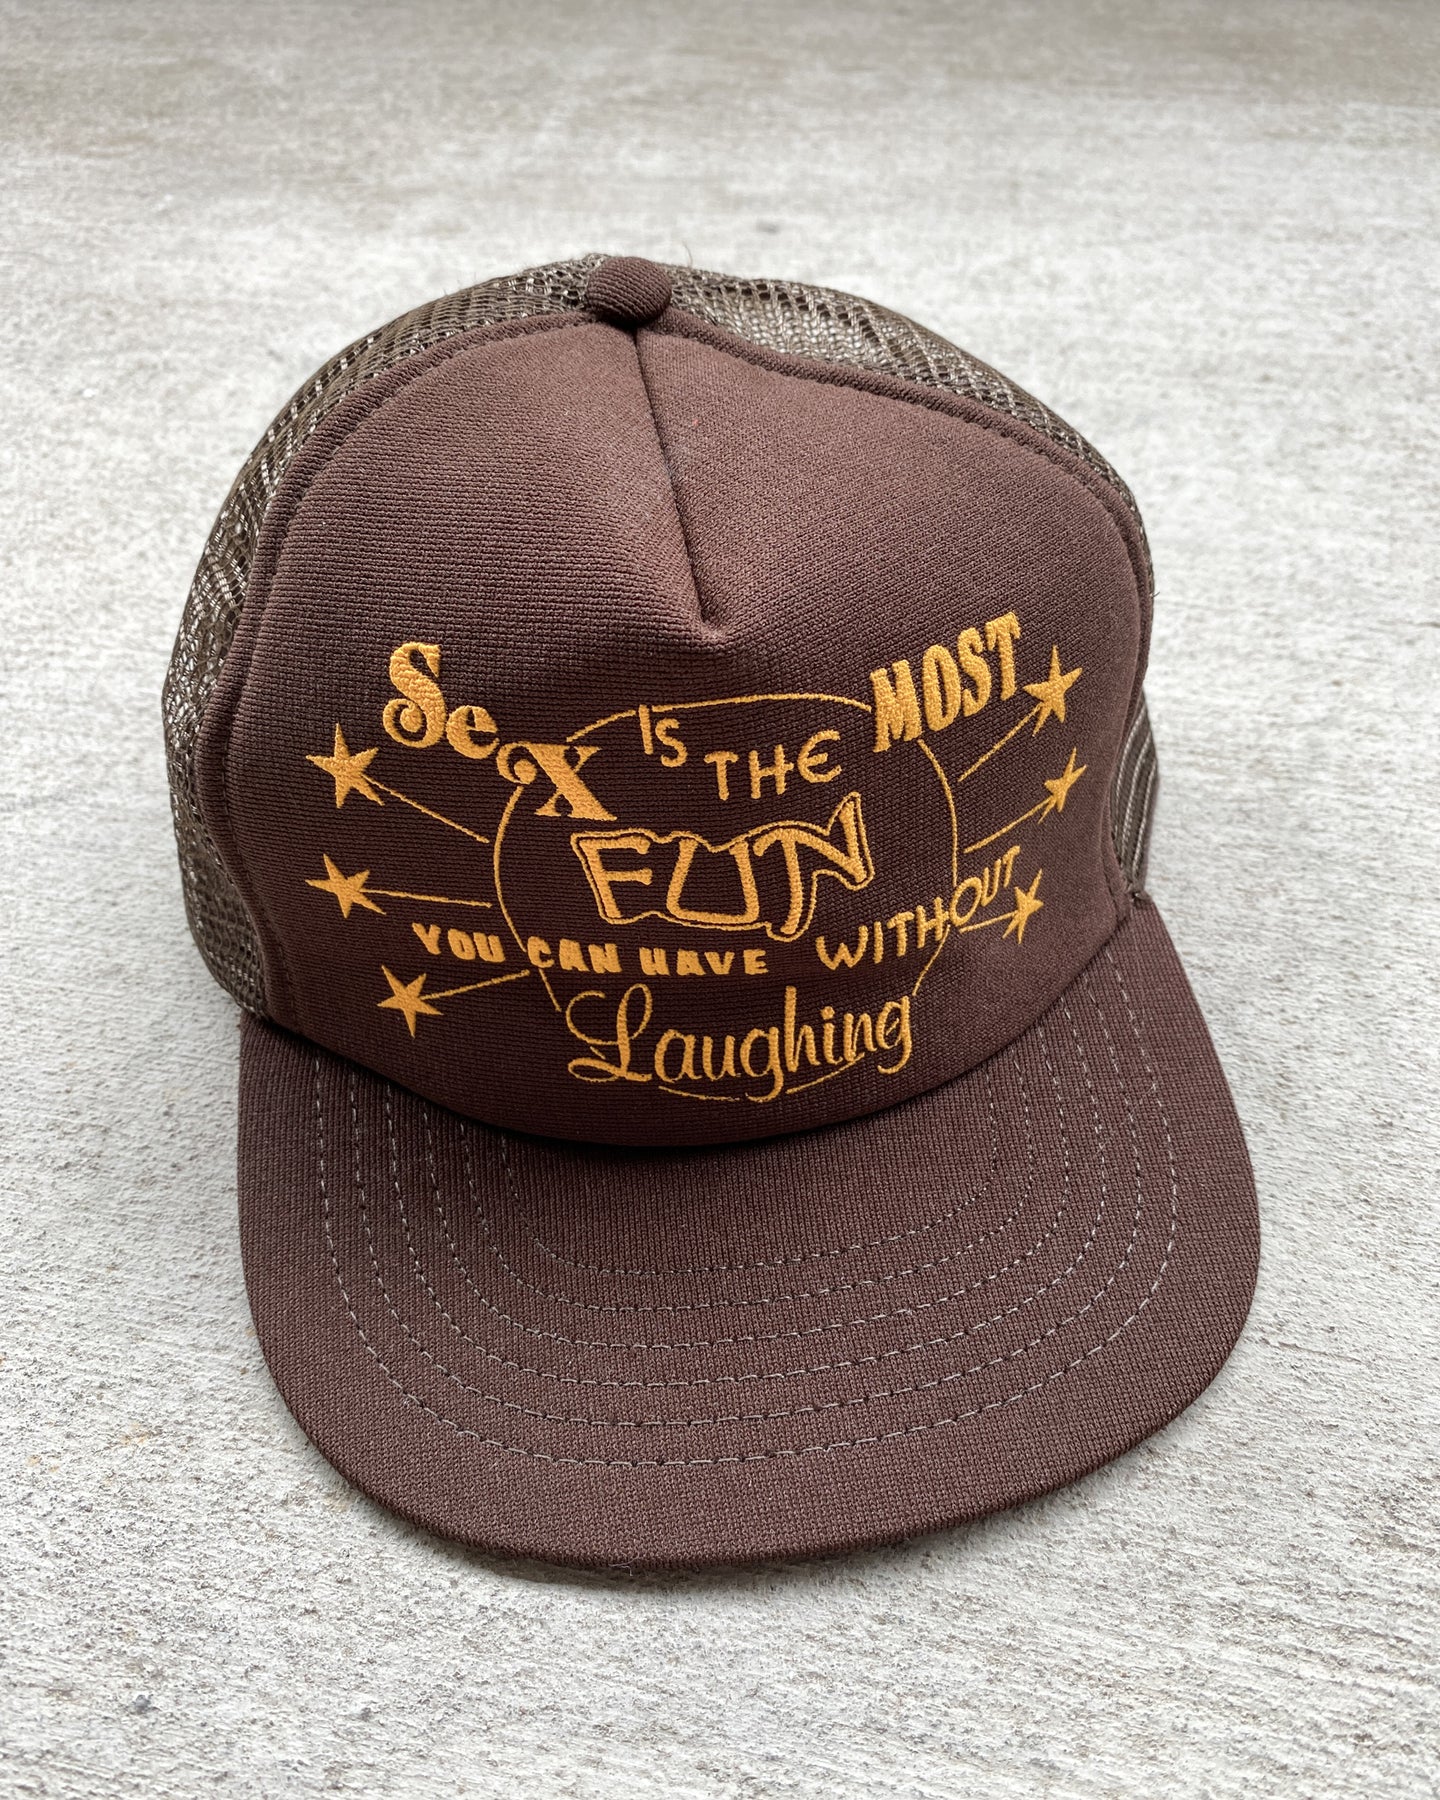 1980s Sex Is the Most Fun You Can Have Without Laughing Trucker Snapback - One Size